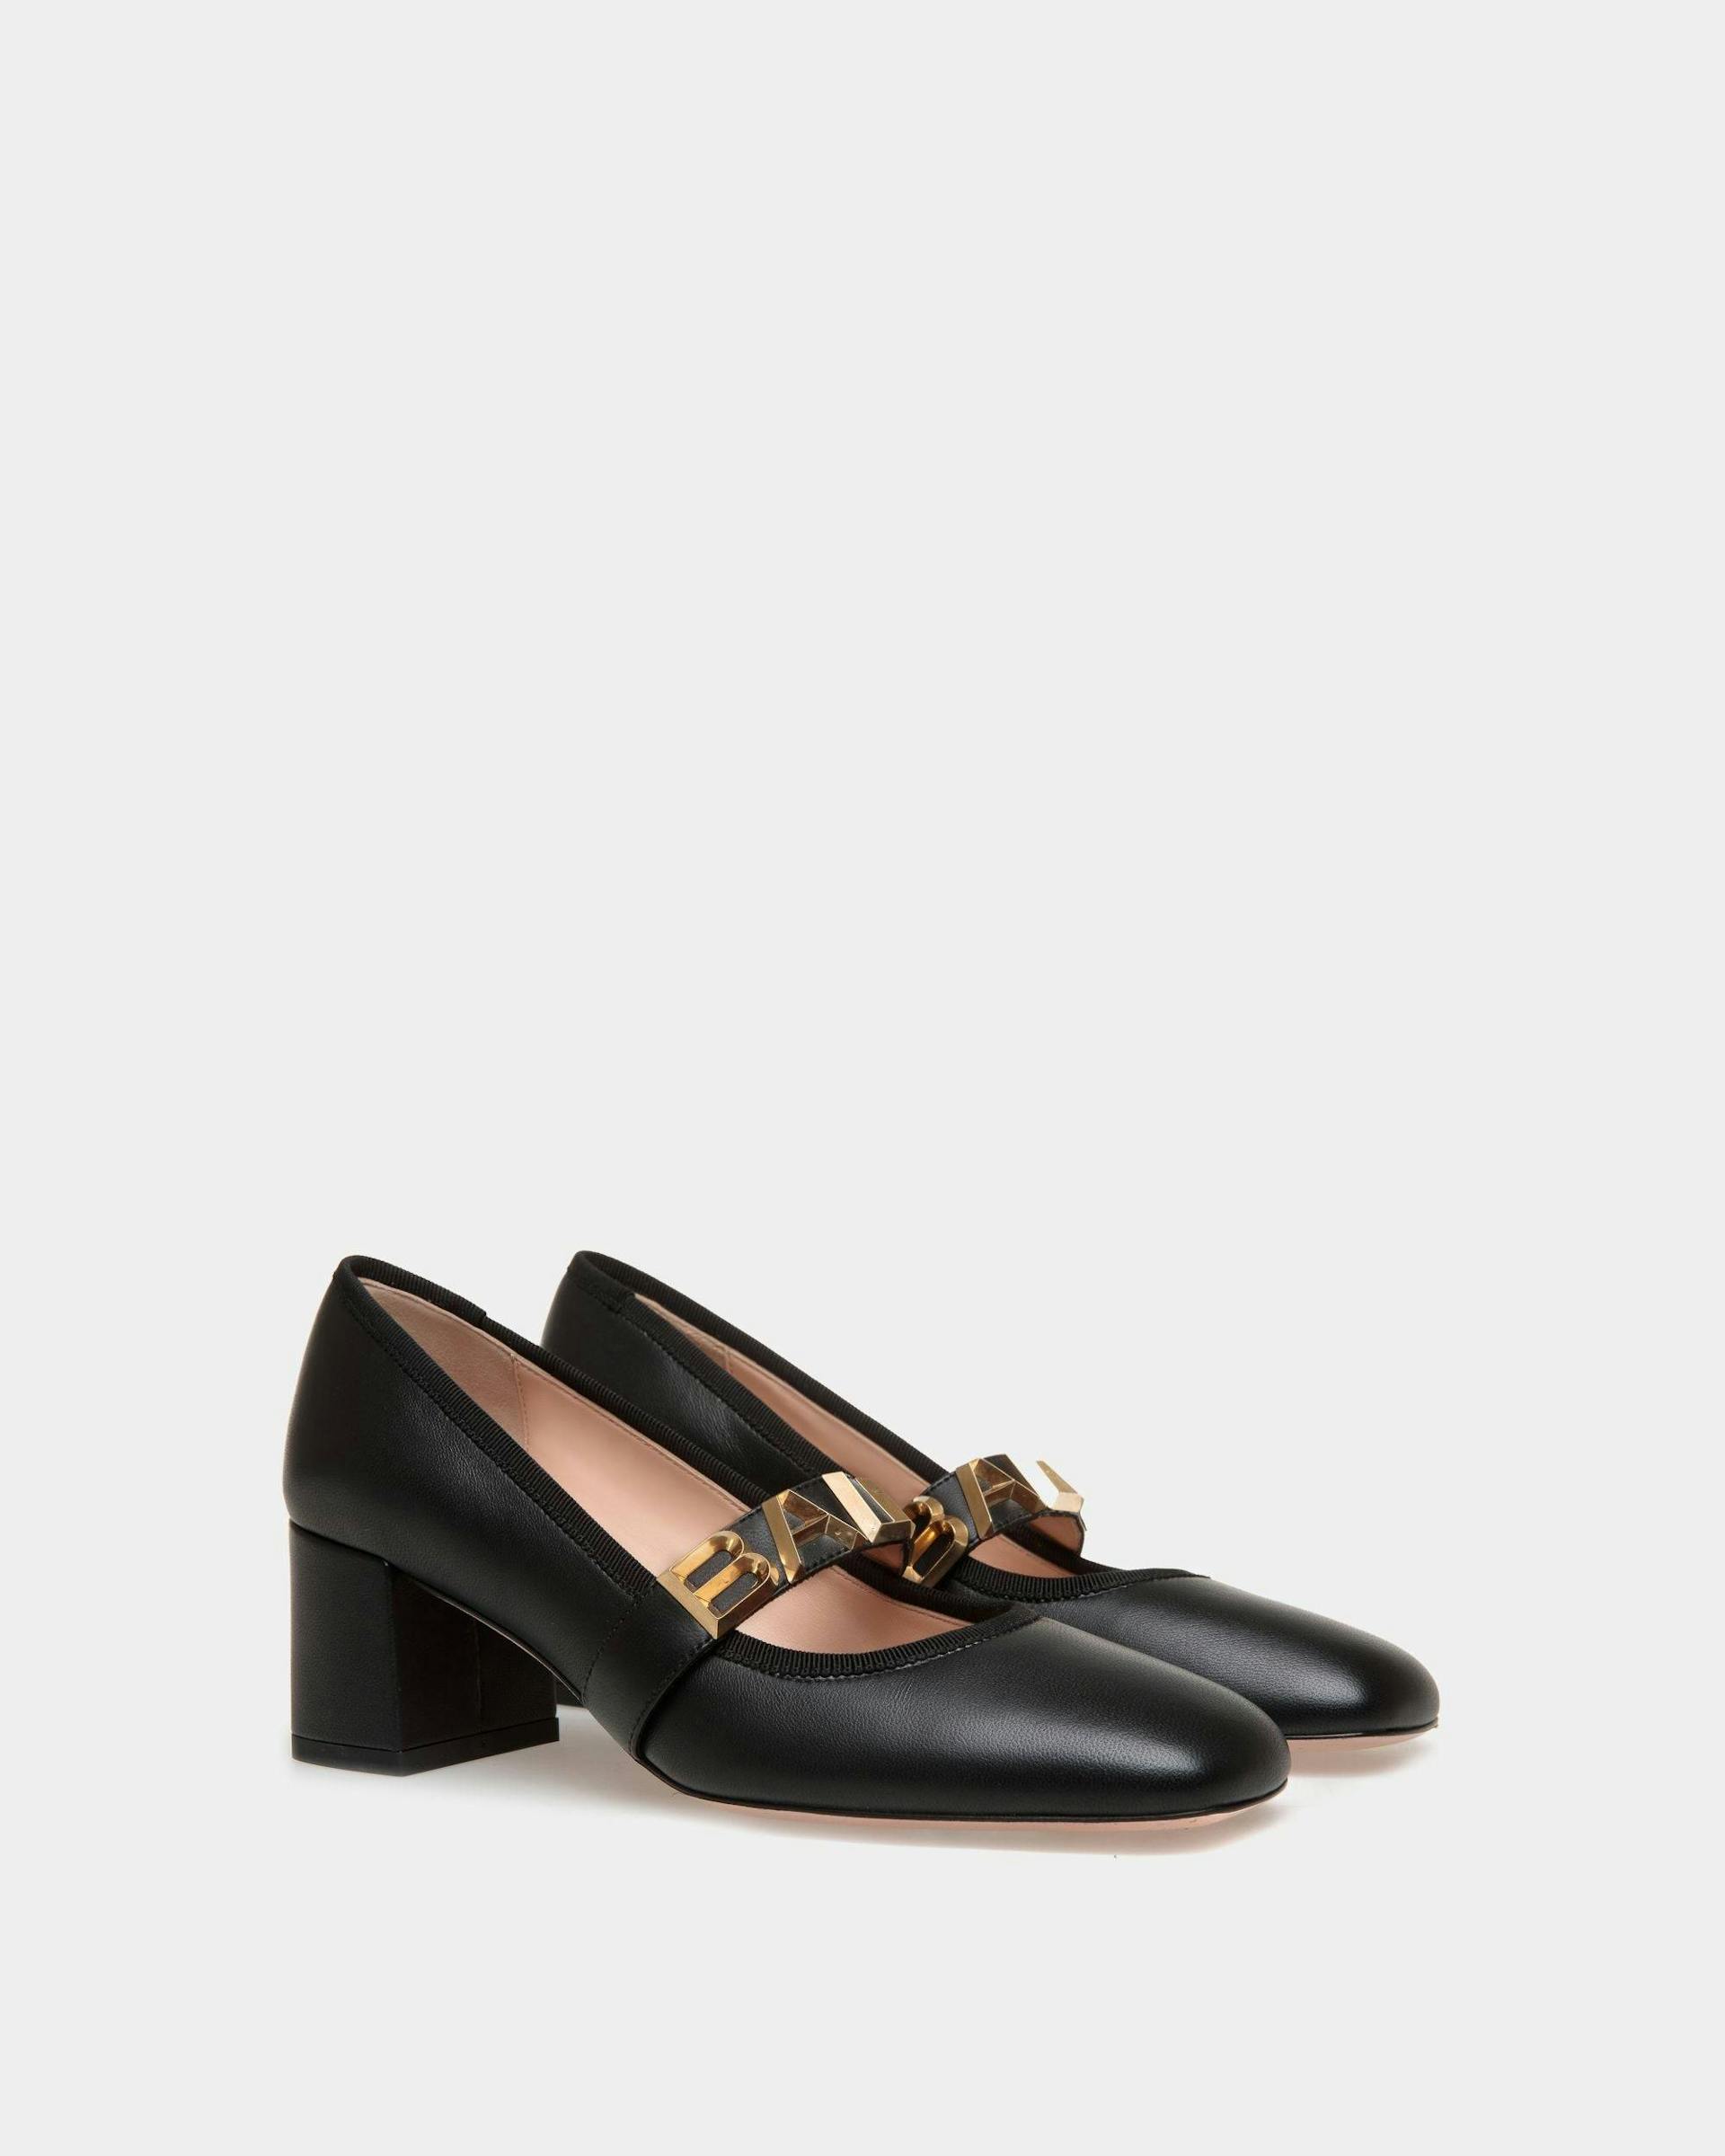 Women's Bally Spell Pump in Black Leather | Bally | Still Life 3/4 Front